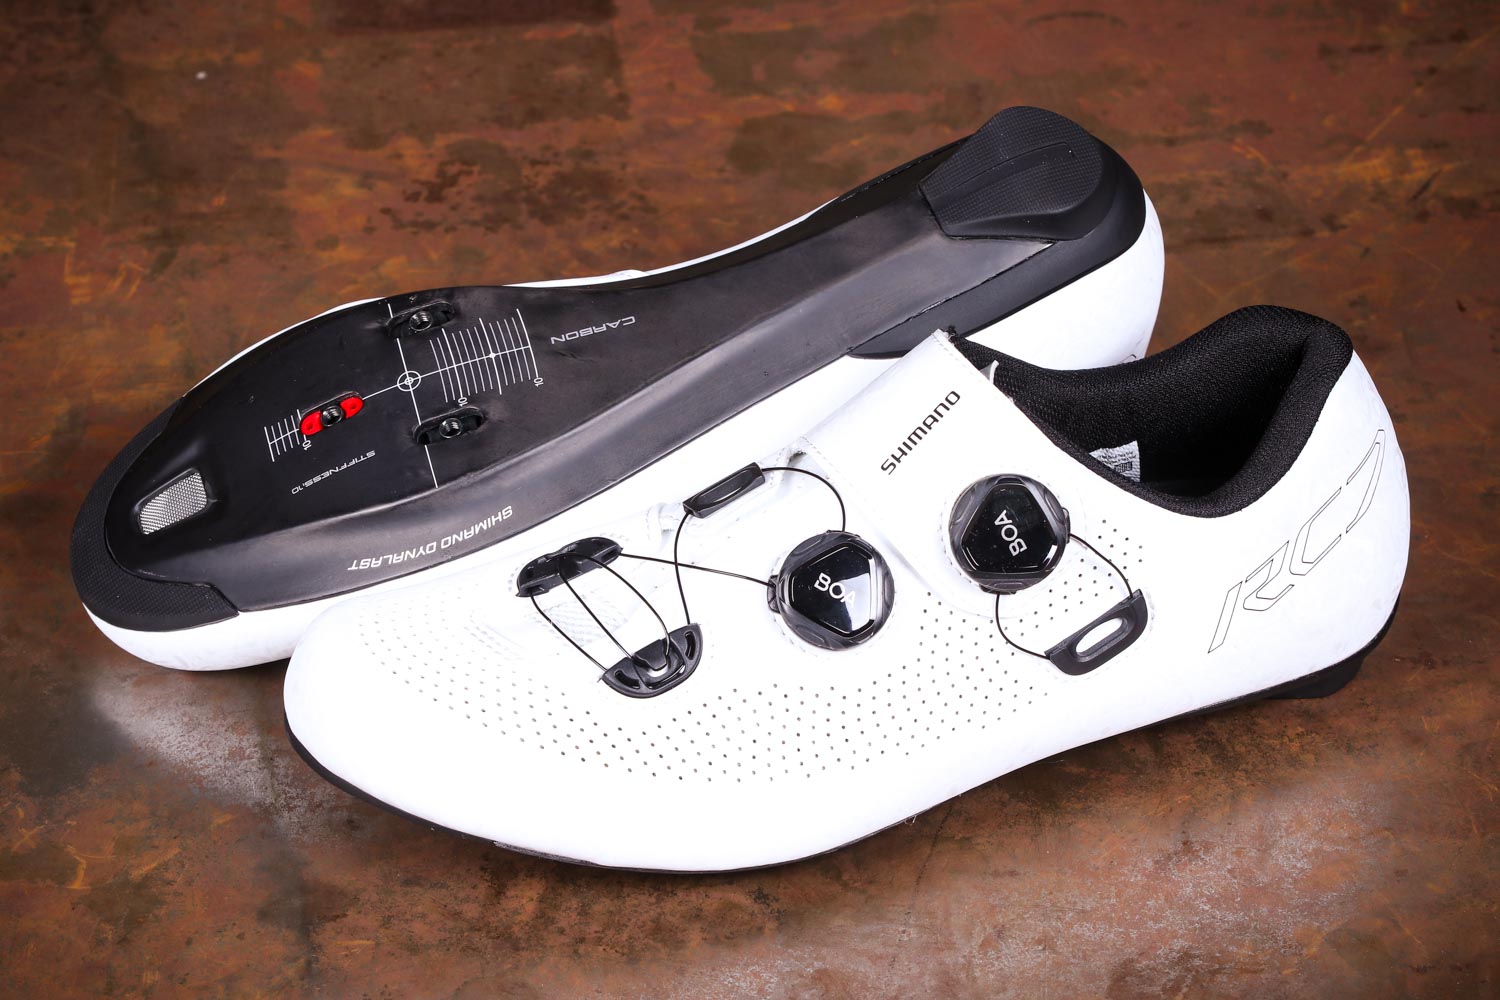 shimano cycling shoes wide fit